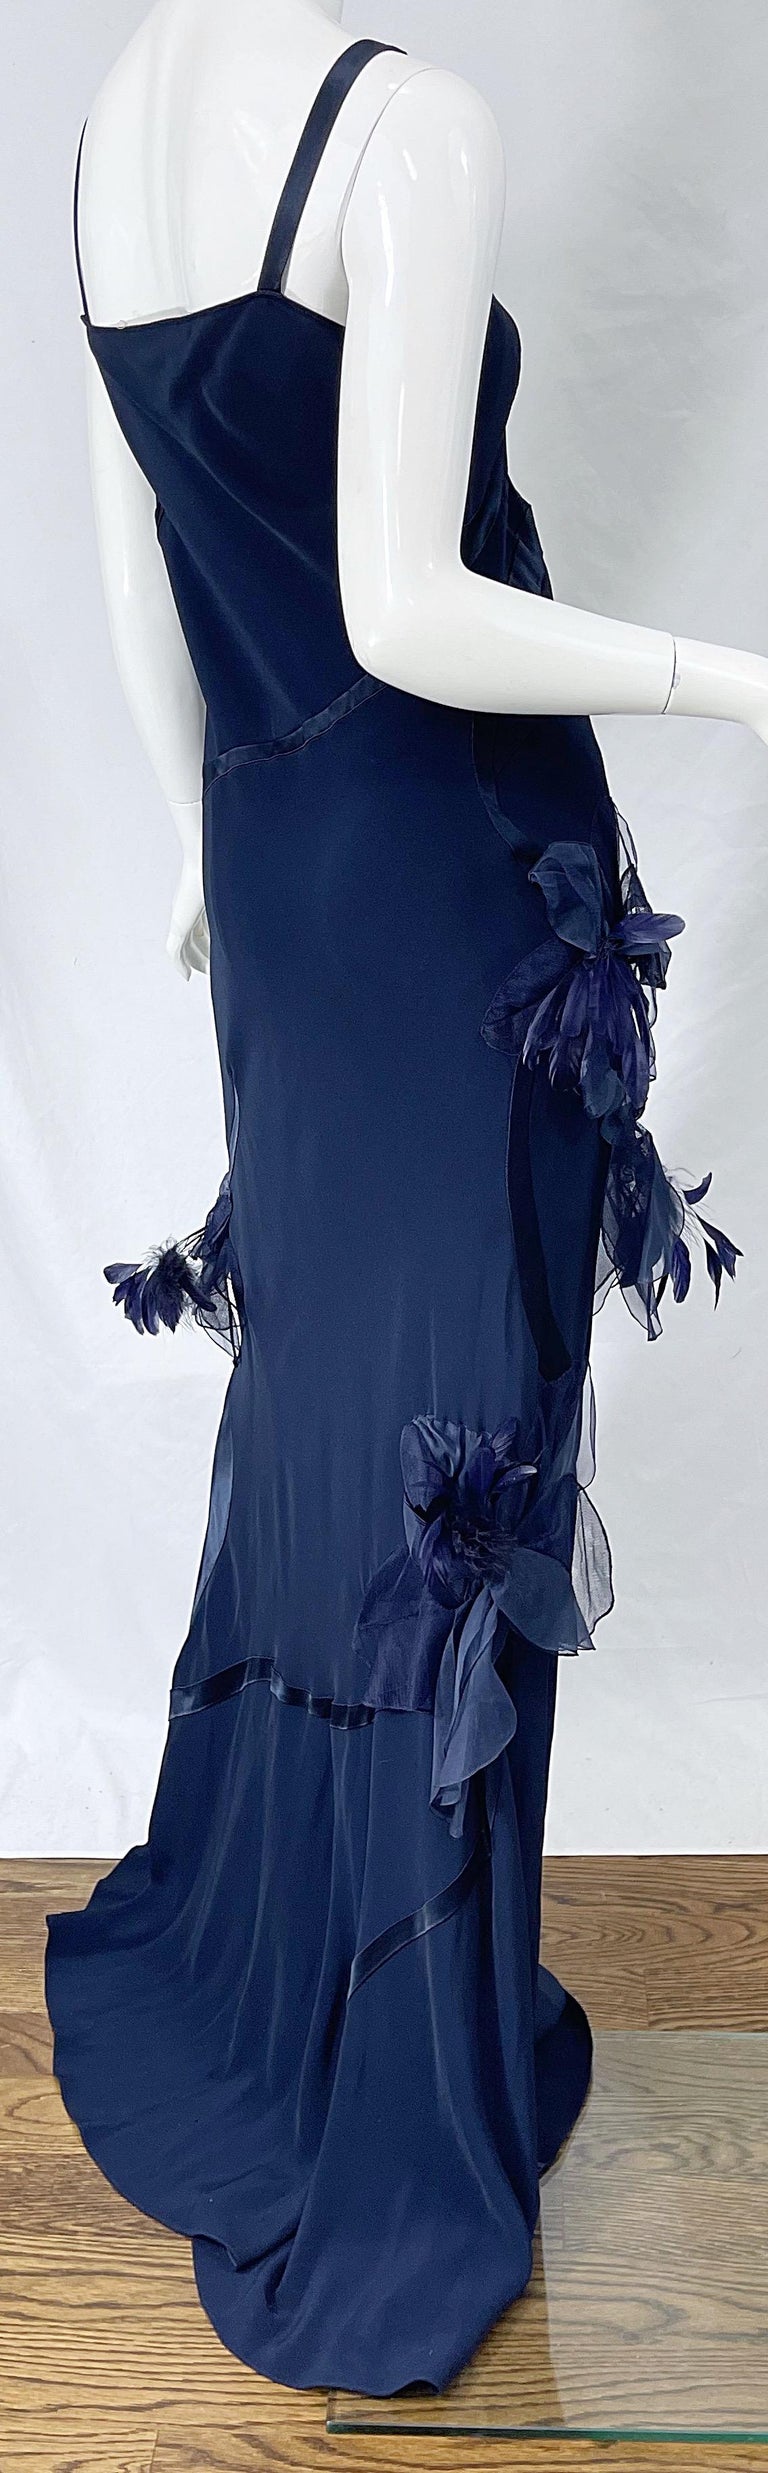 NWT John Galliano Size 10 Early 2000s Navy Blue Feather Silk / Satin Gown Dress For Sale 5